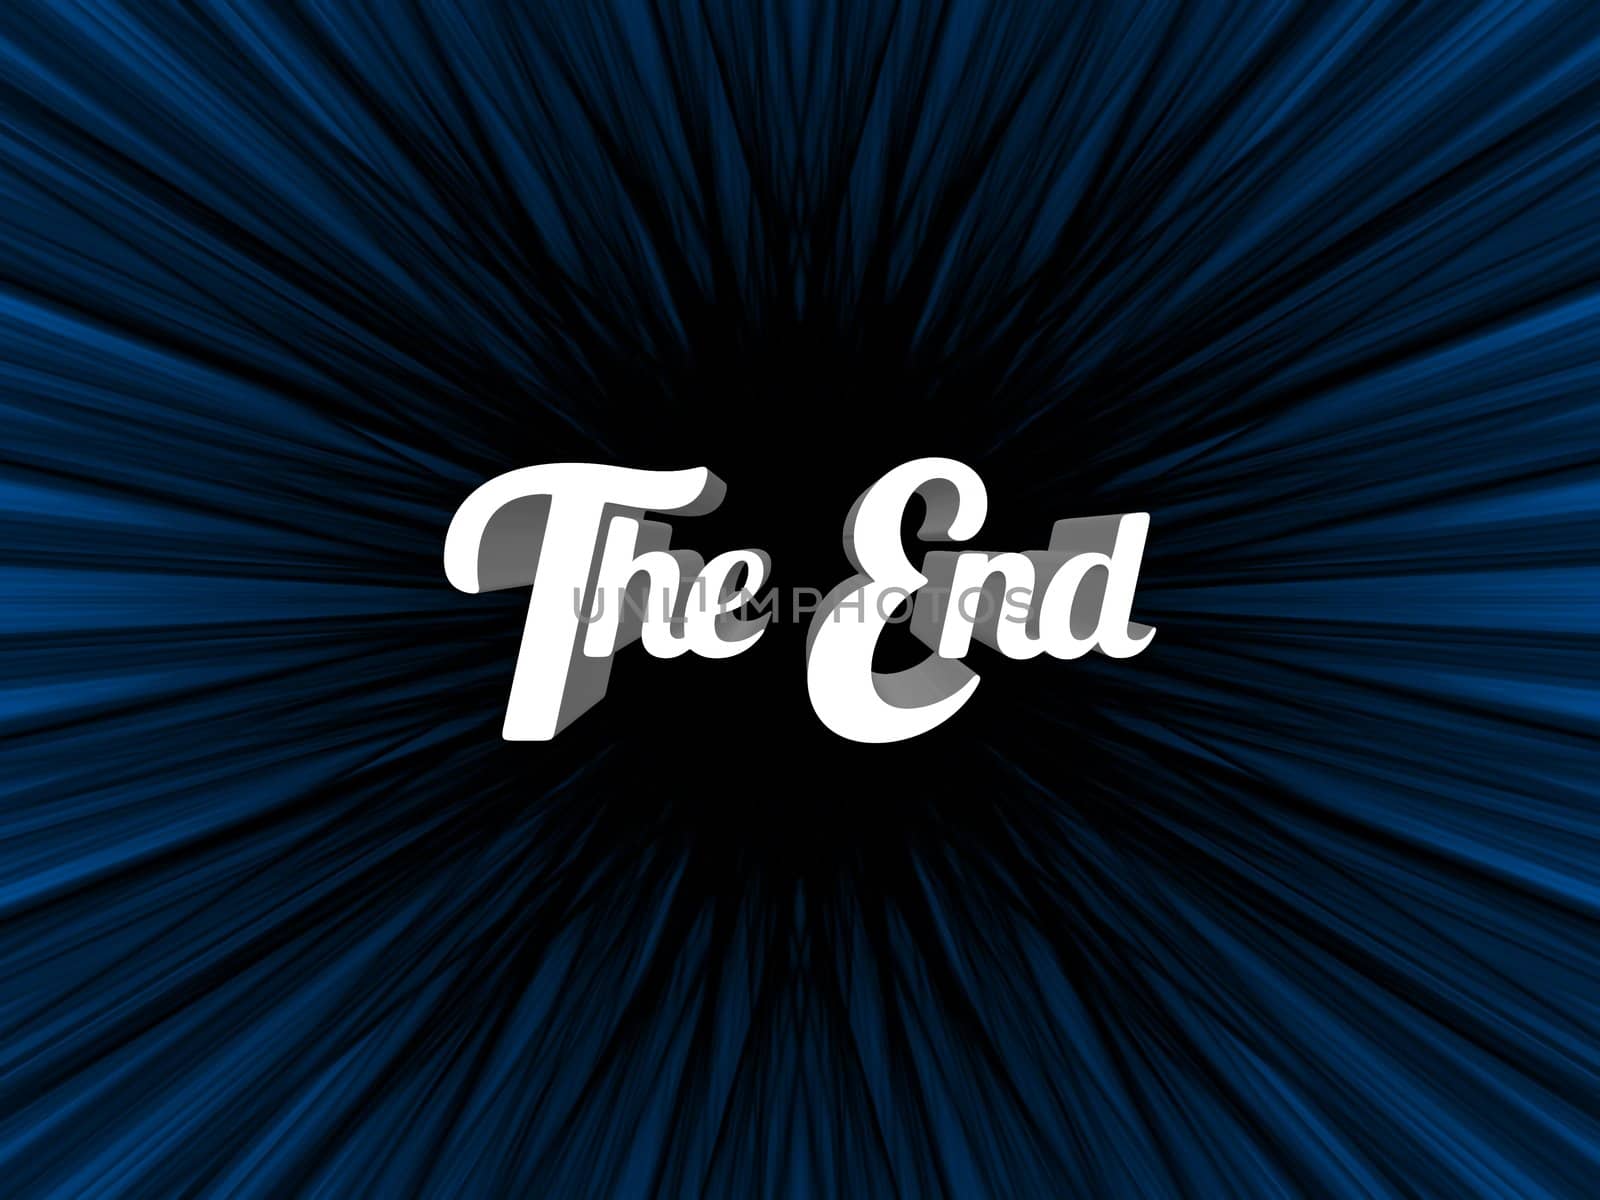 Illustration of text saying THE END over a blue abstract background